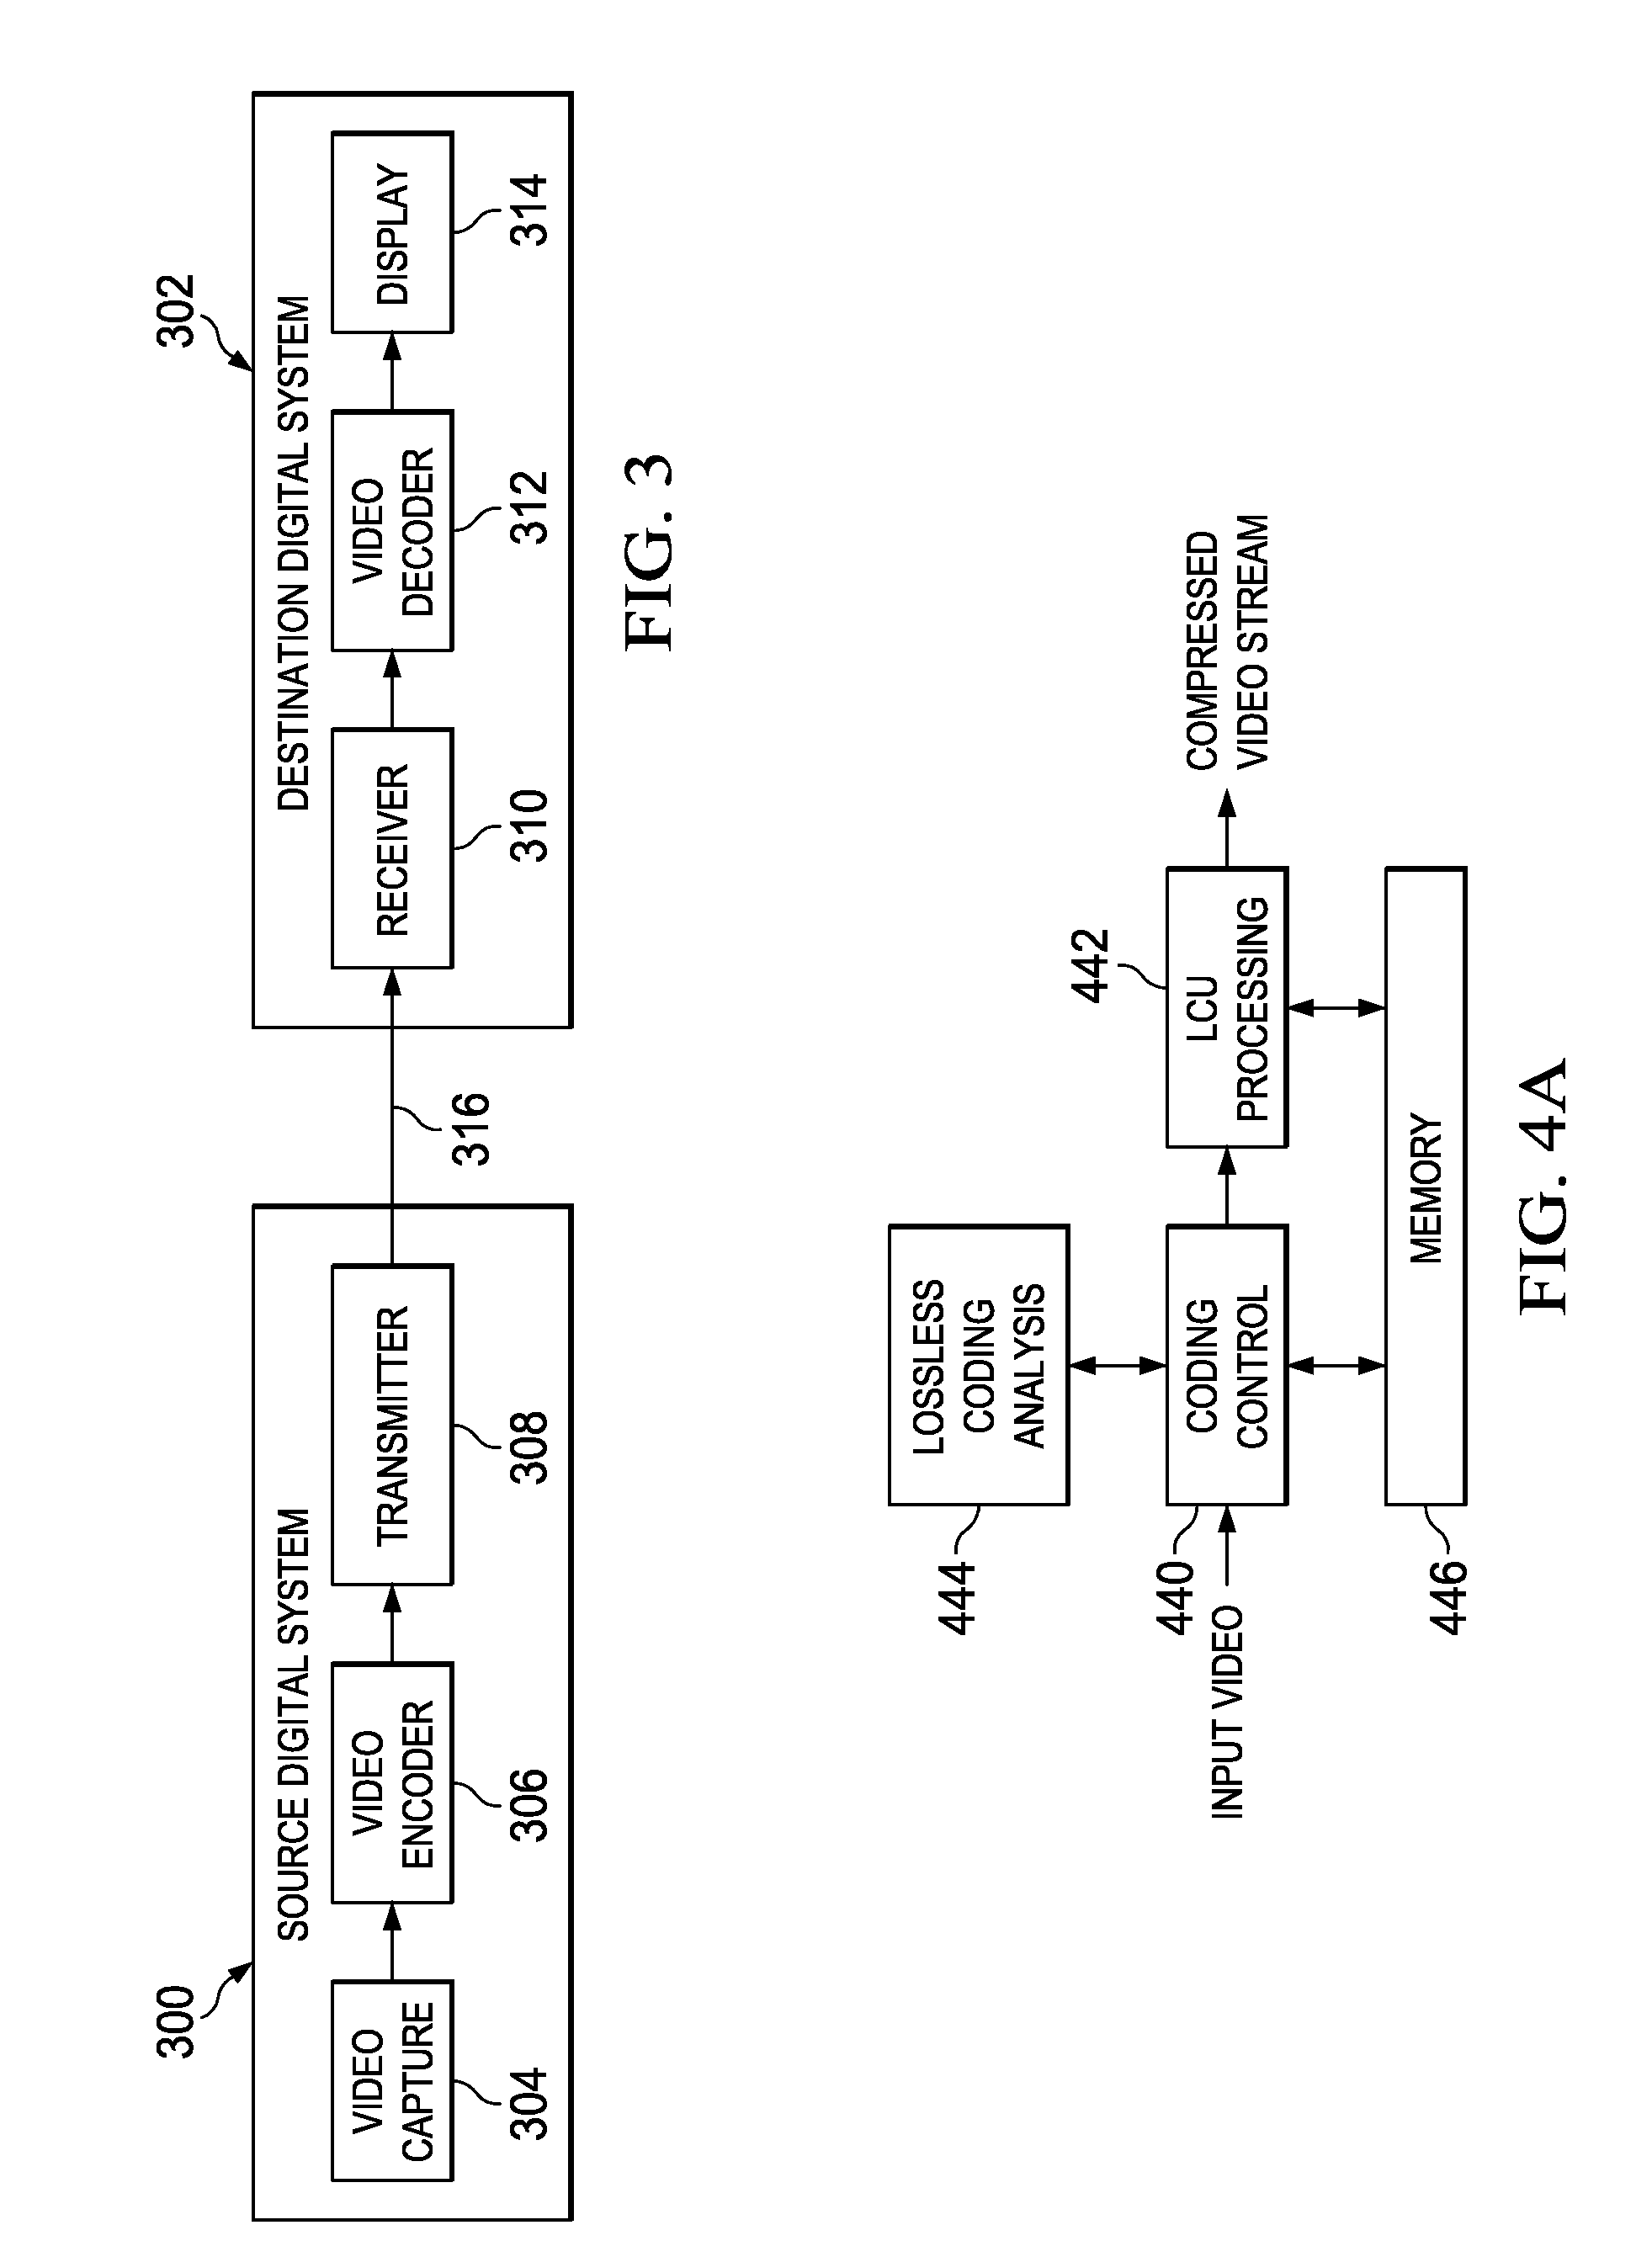 Method and System for Lossless Coding Mode in Video Coding